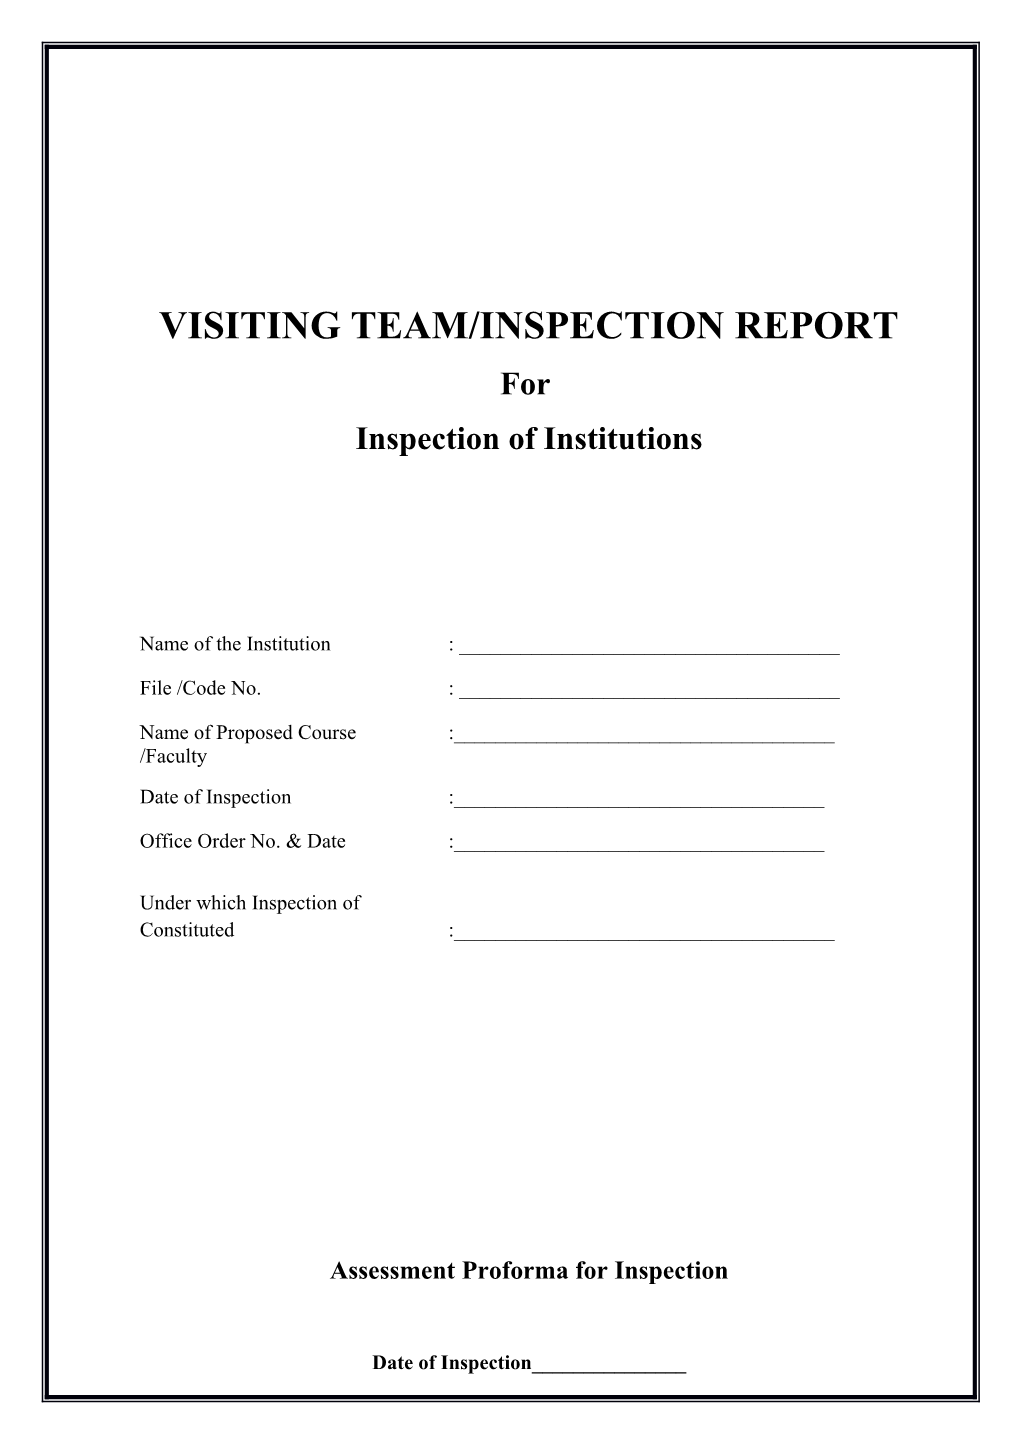 Visiting Team/Inspection Report